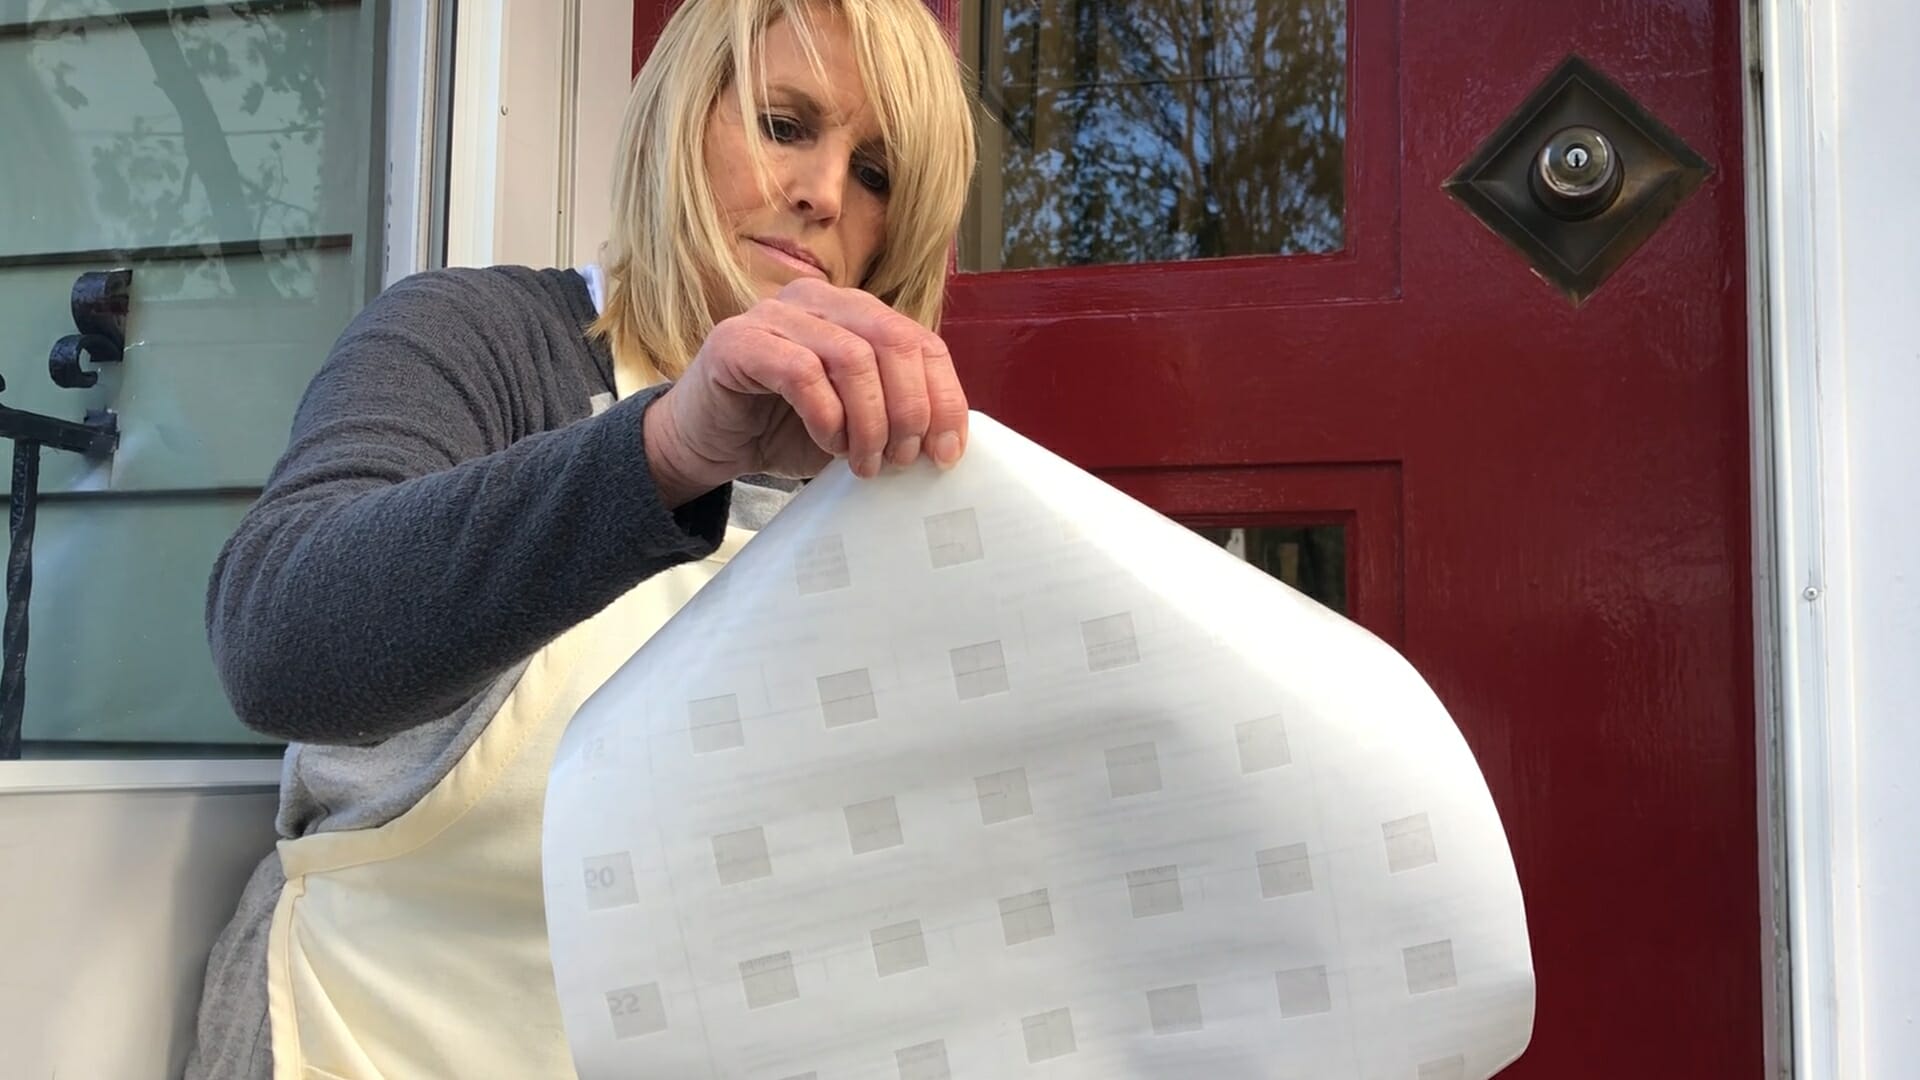 woman unrolling privacy material for window